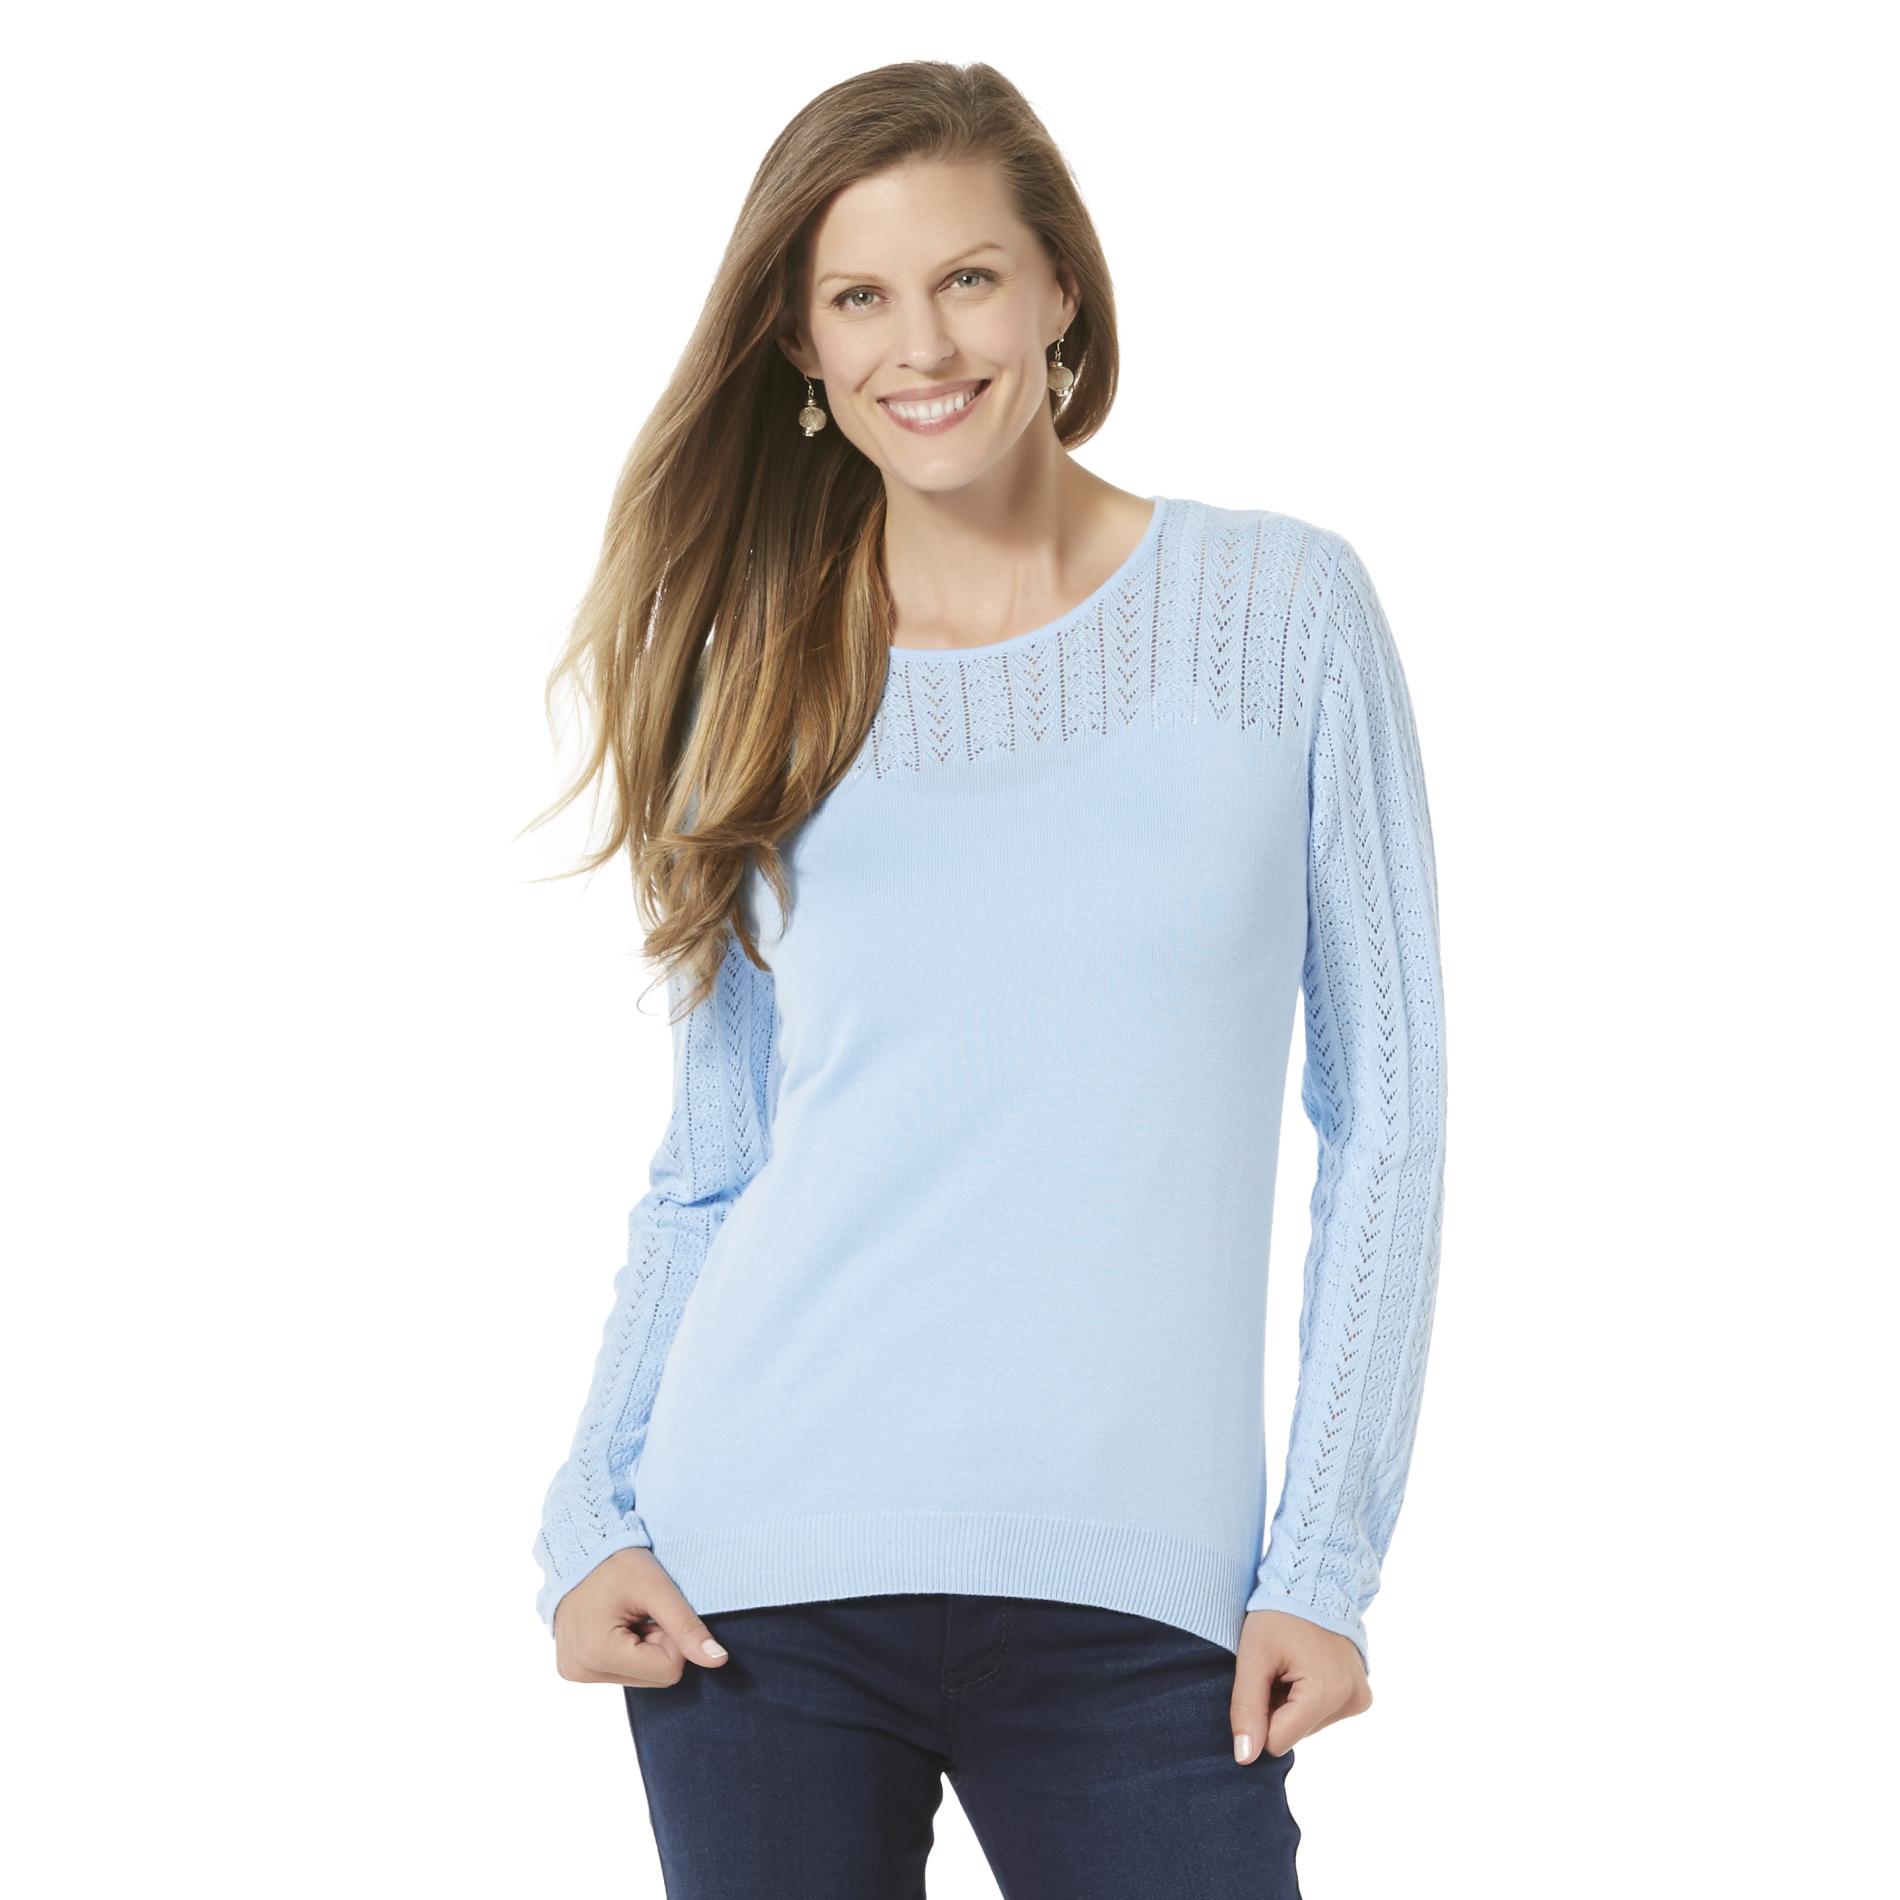 Basic Editions Women's Pointelle Sweater